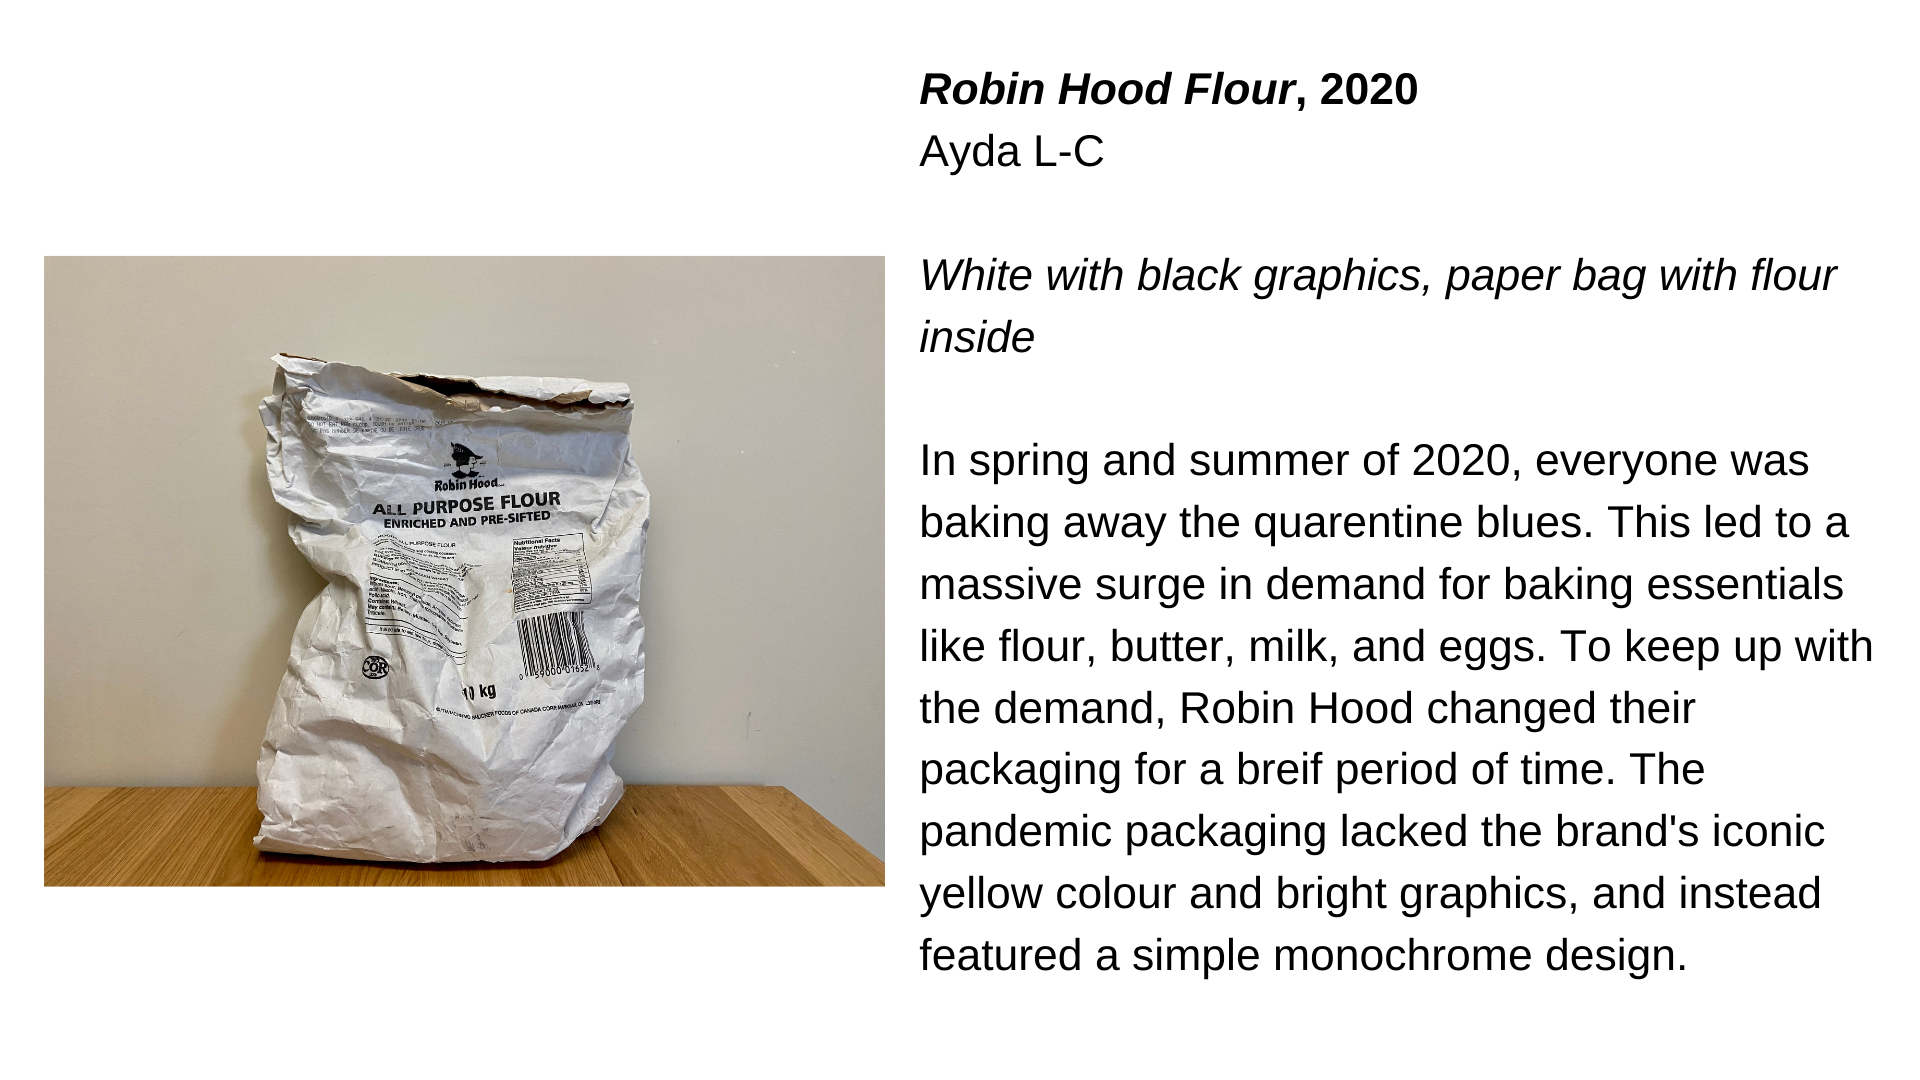  A bag of flour next to the text “Robin Hood Flour, 2020 - Ayda L-C. White with black graphics, paper bag with flour inside. In spring and summer of 2020, everyone was baking away the quarantine blues. This led to a massive surge in demand for baking